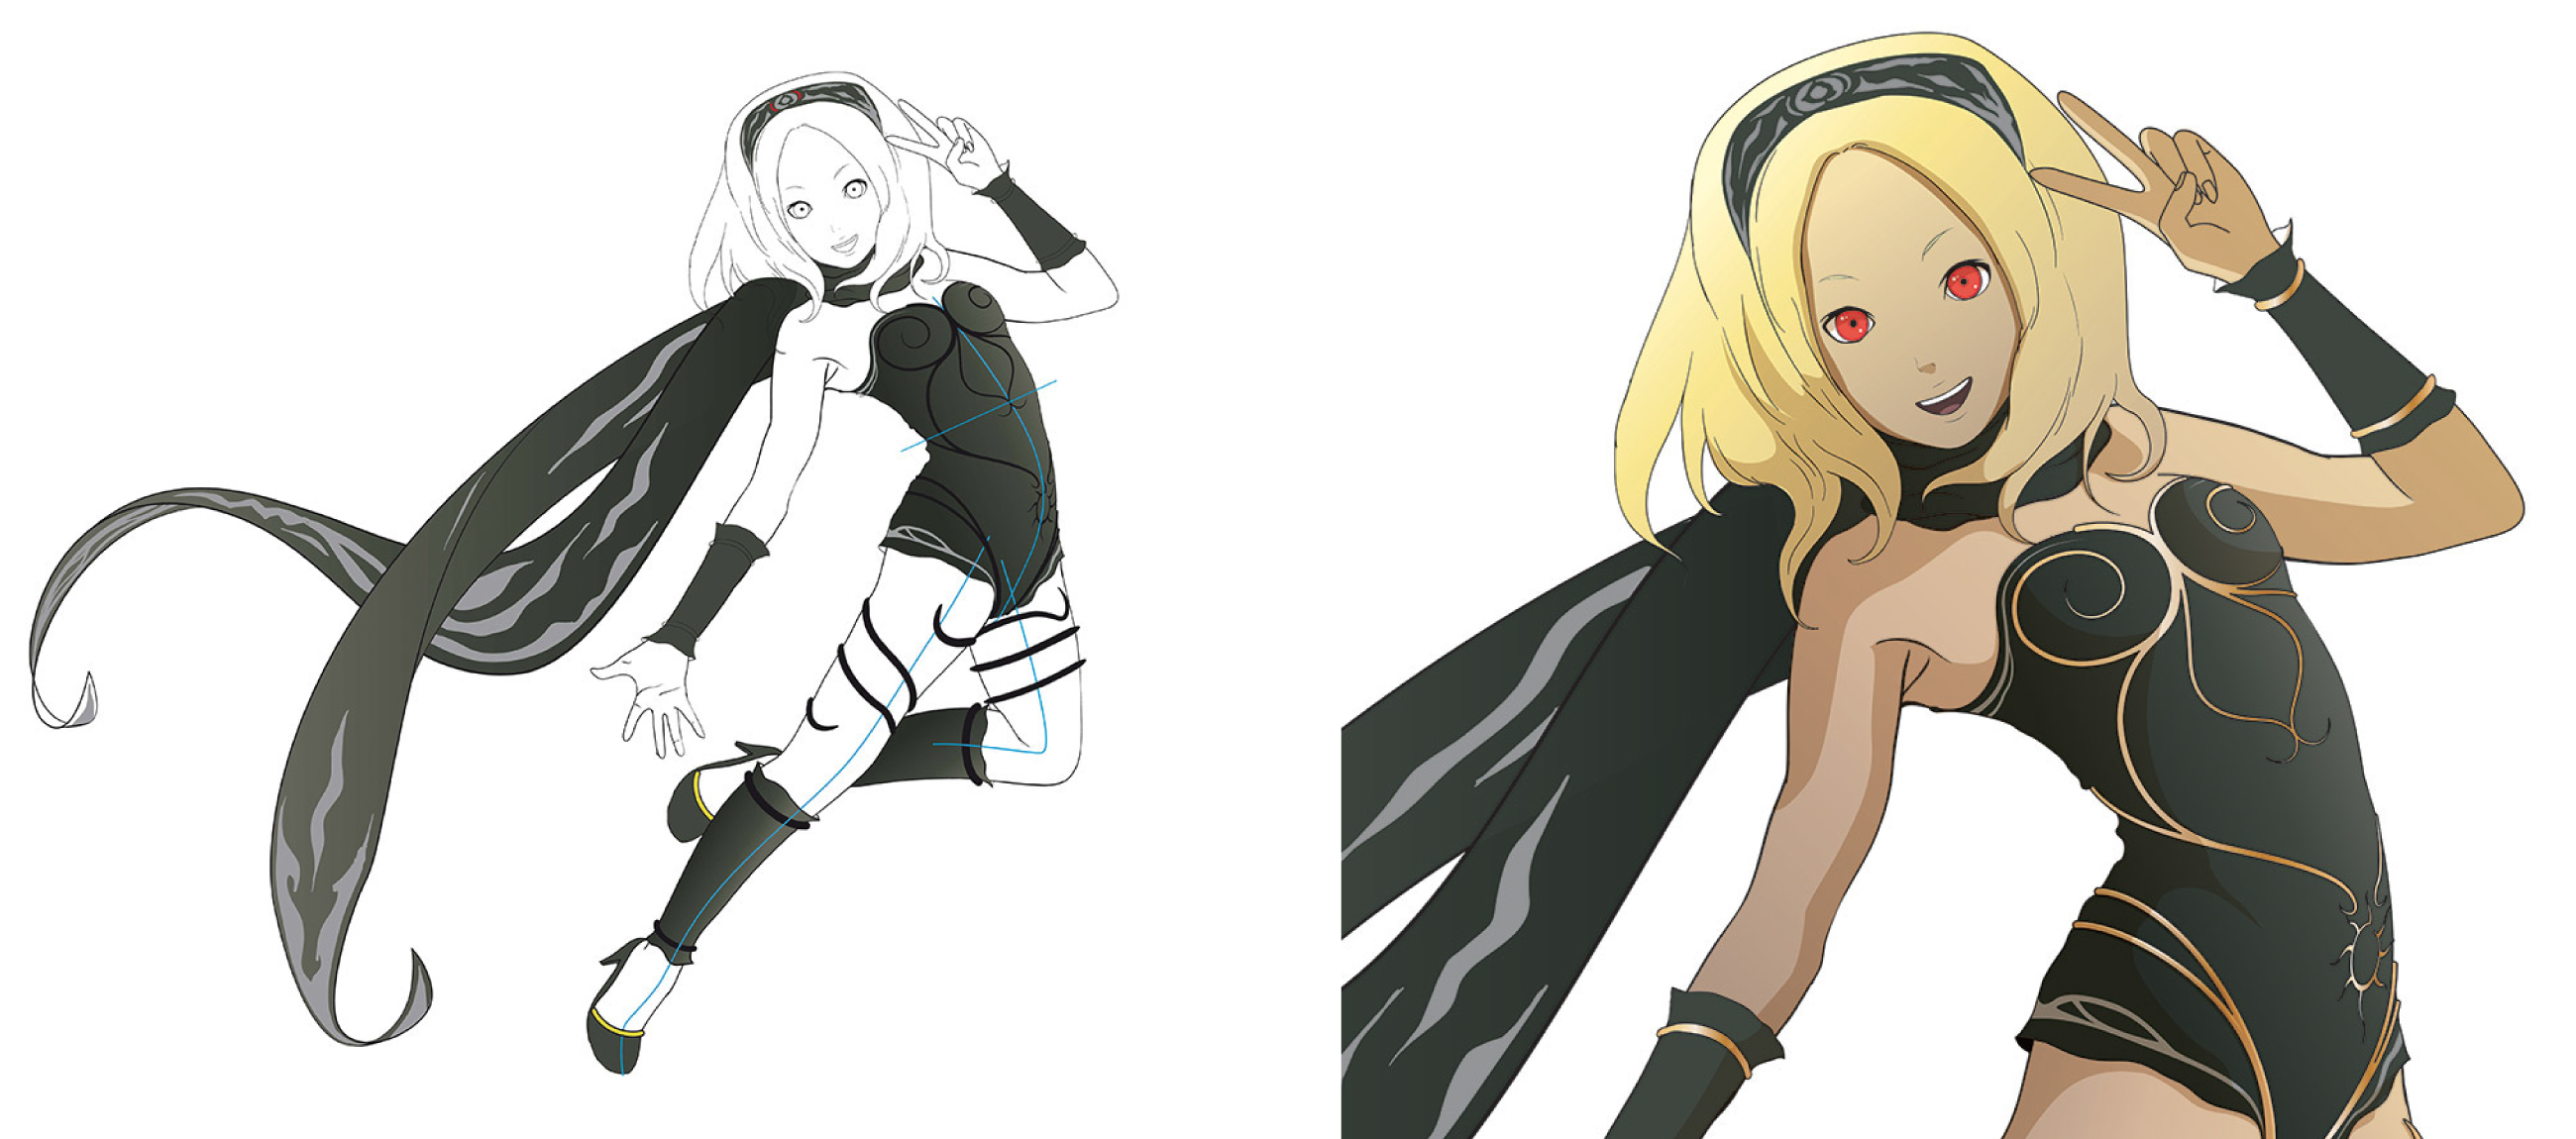 Tribute to the video game developed by Project Siren, "Gravity Rush &q...